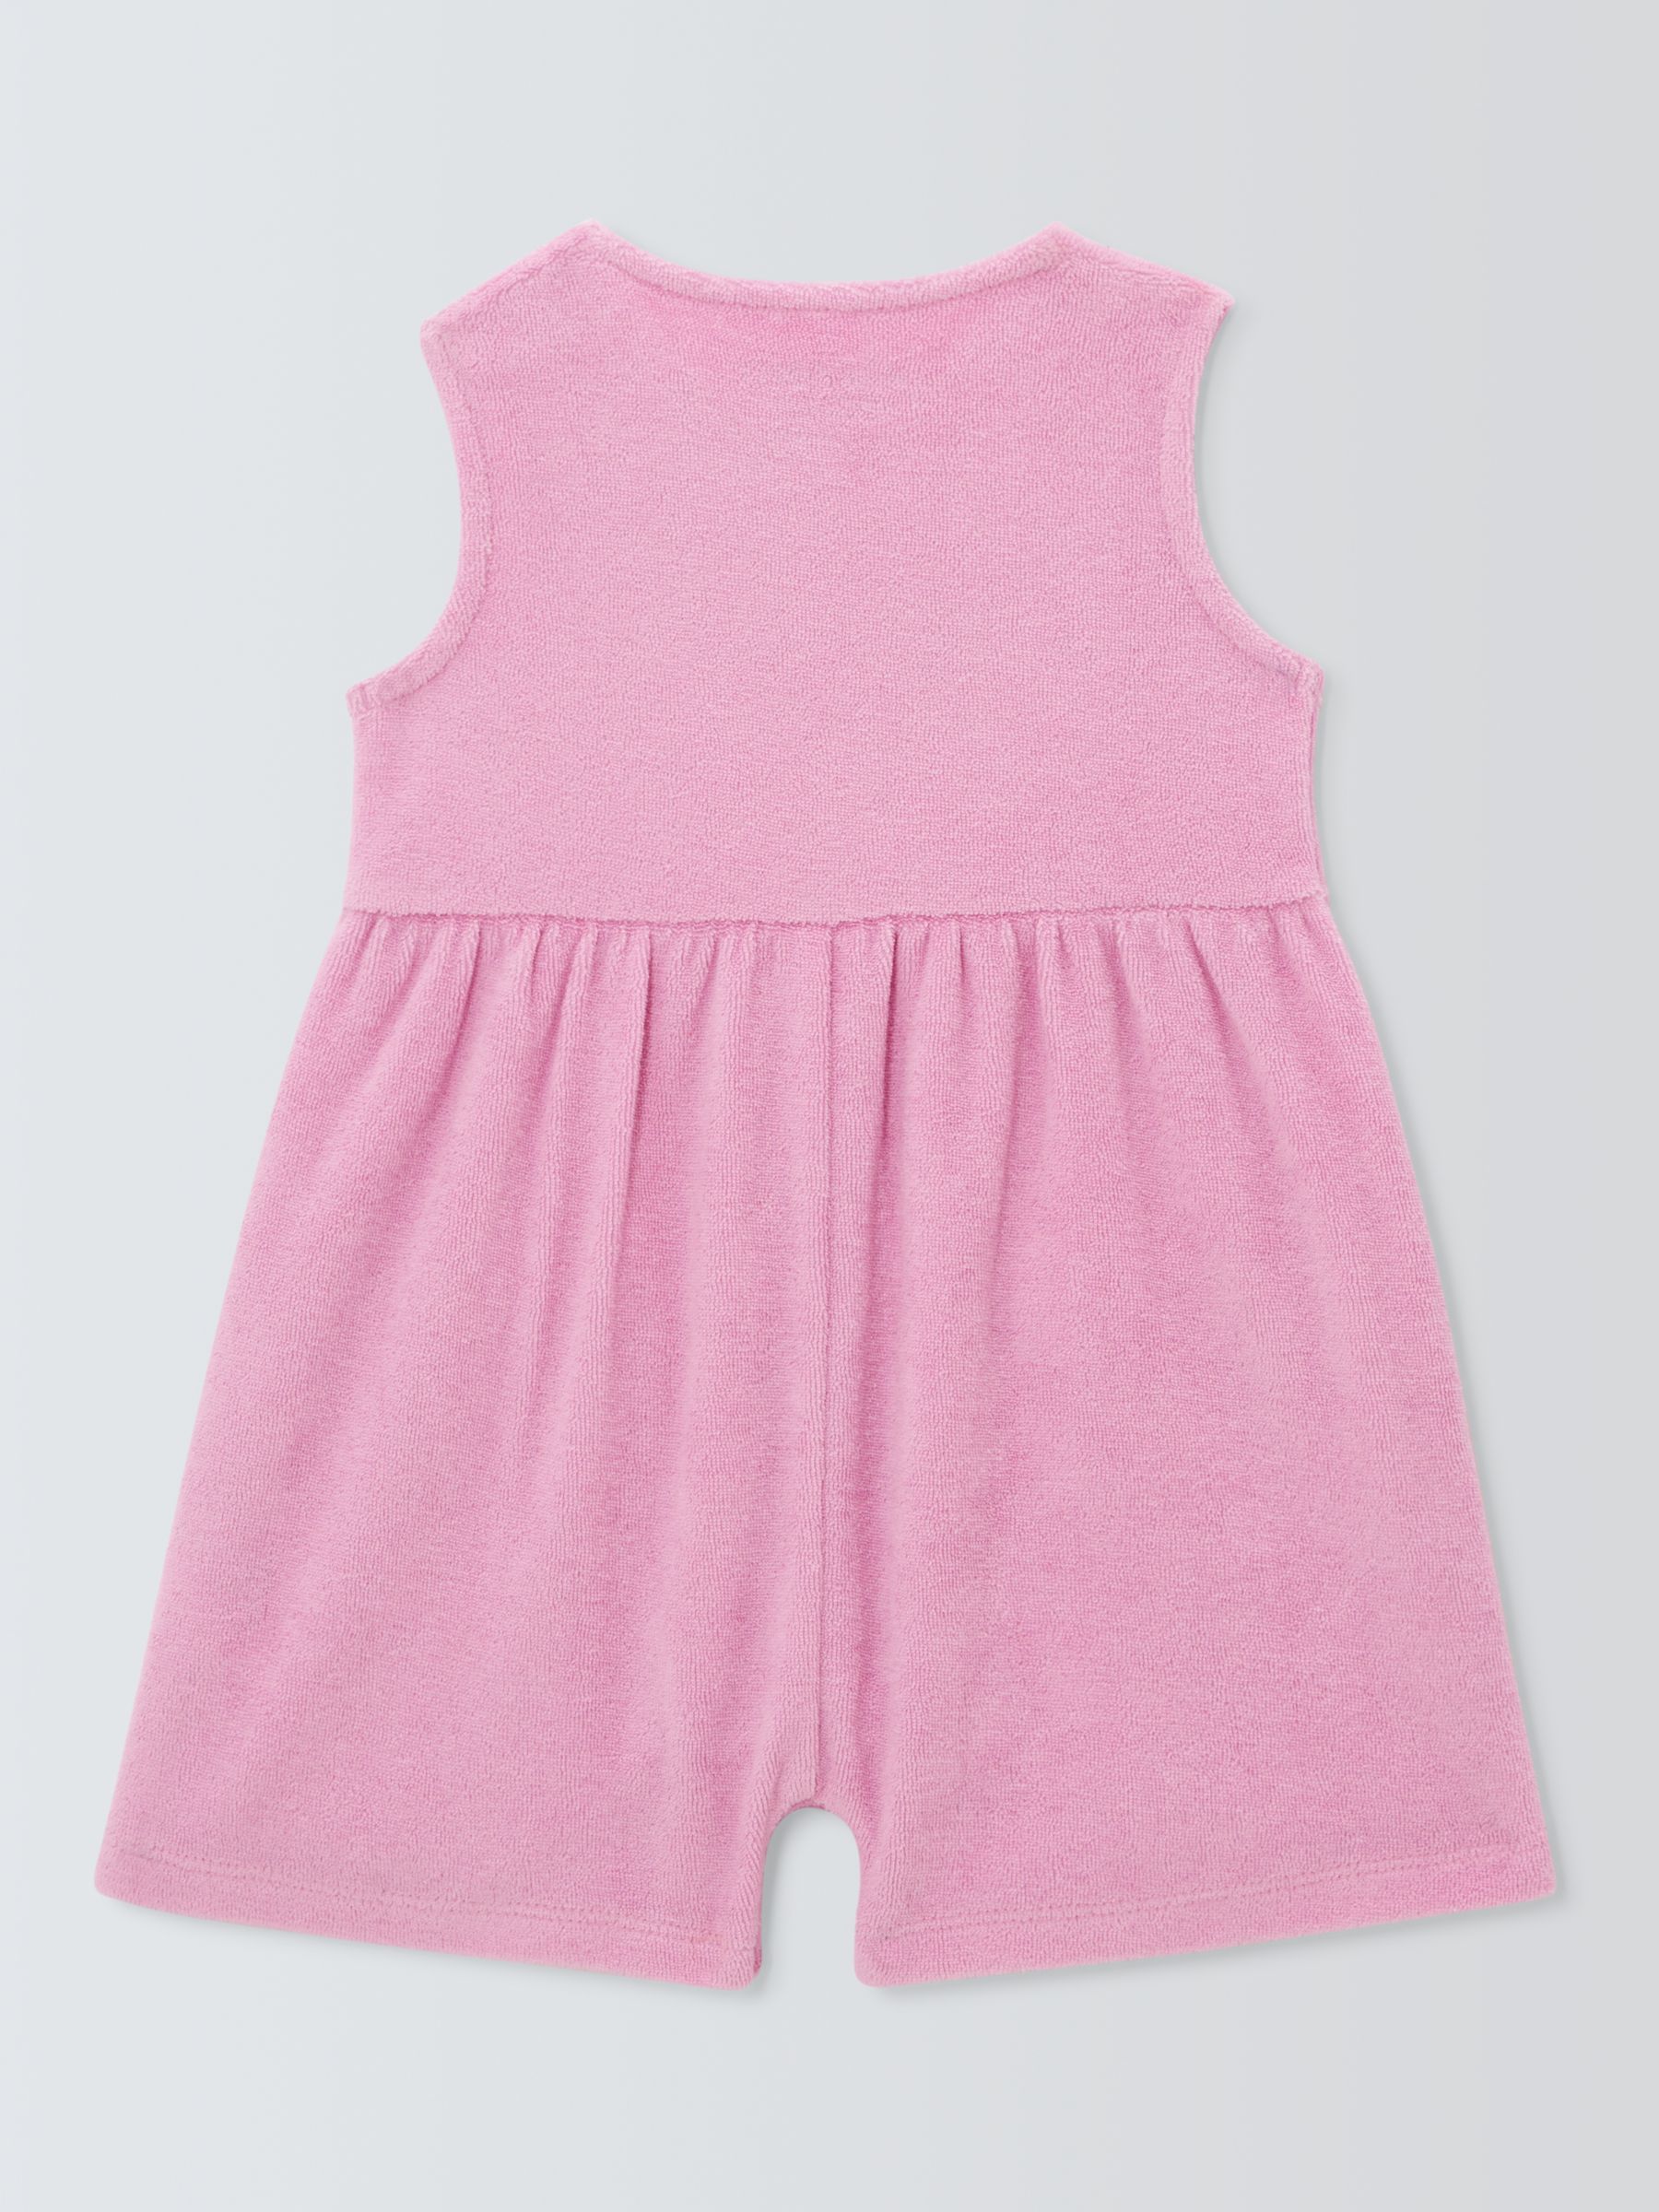 Buy John Lewis ANYDAY Baby Towelling Playsuit, Pink Online at johnlewis.com